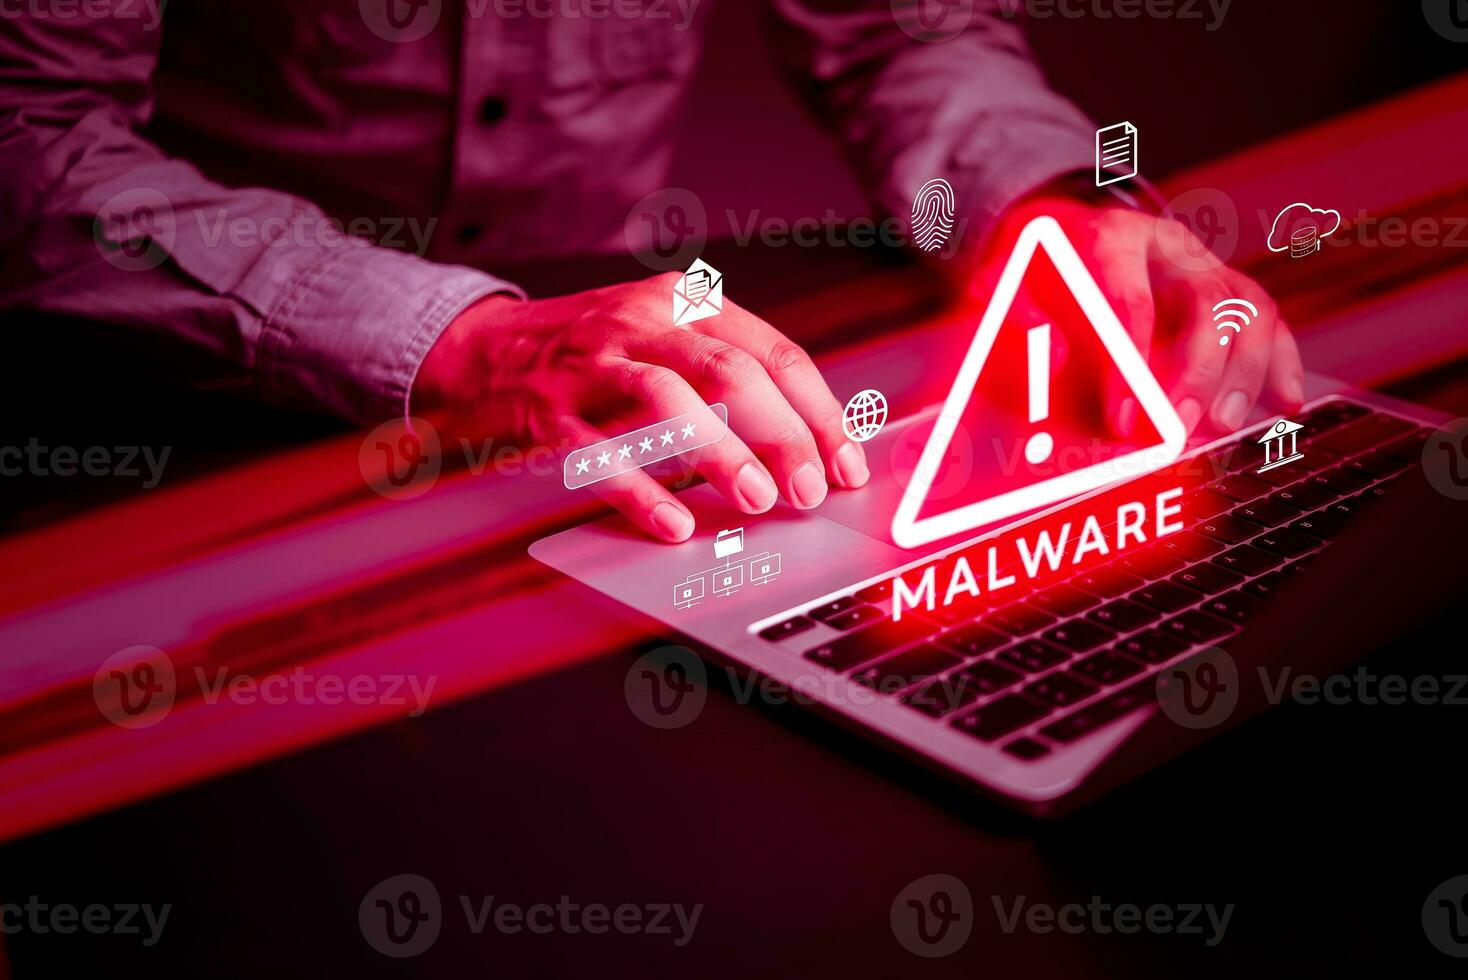 hacker uses malware with laptop computer hack password the personal data and money from Bank accounts.Scam Virus Spyware Malware Antivirus digital technology internet online Concept. photo